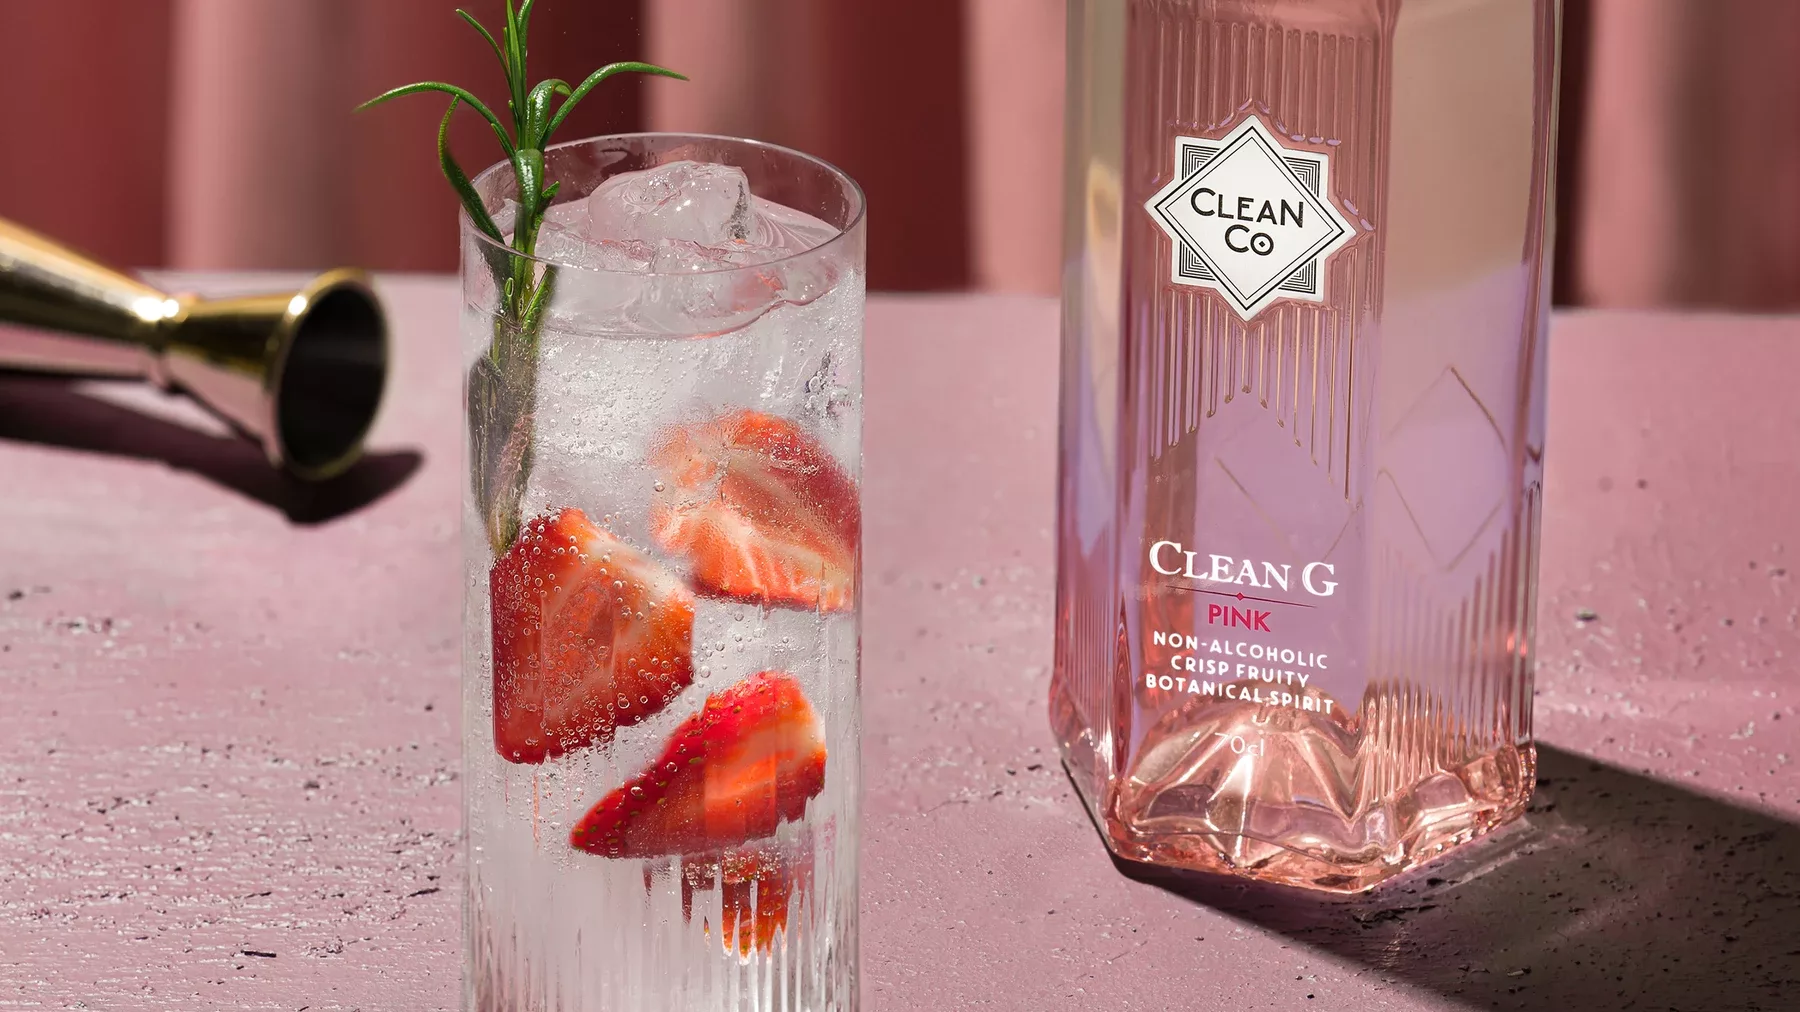 clean co clean g pink non alcoholic gin alternative